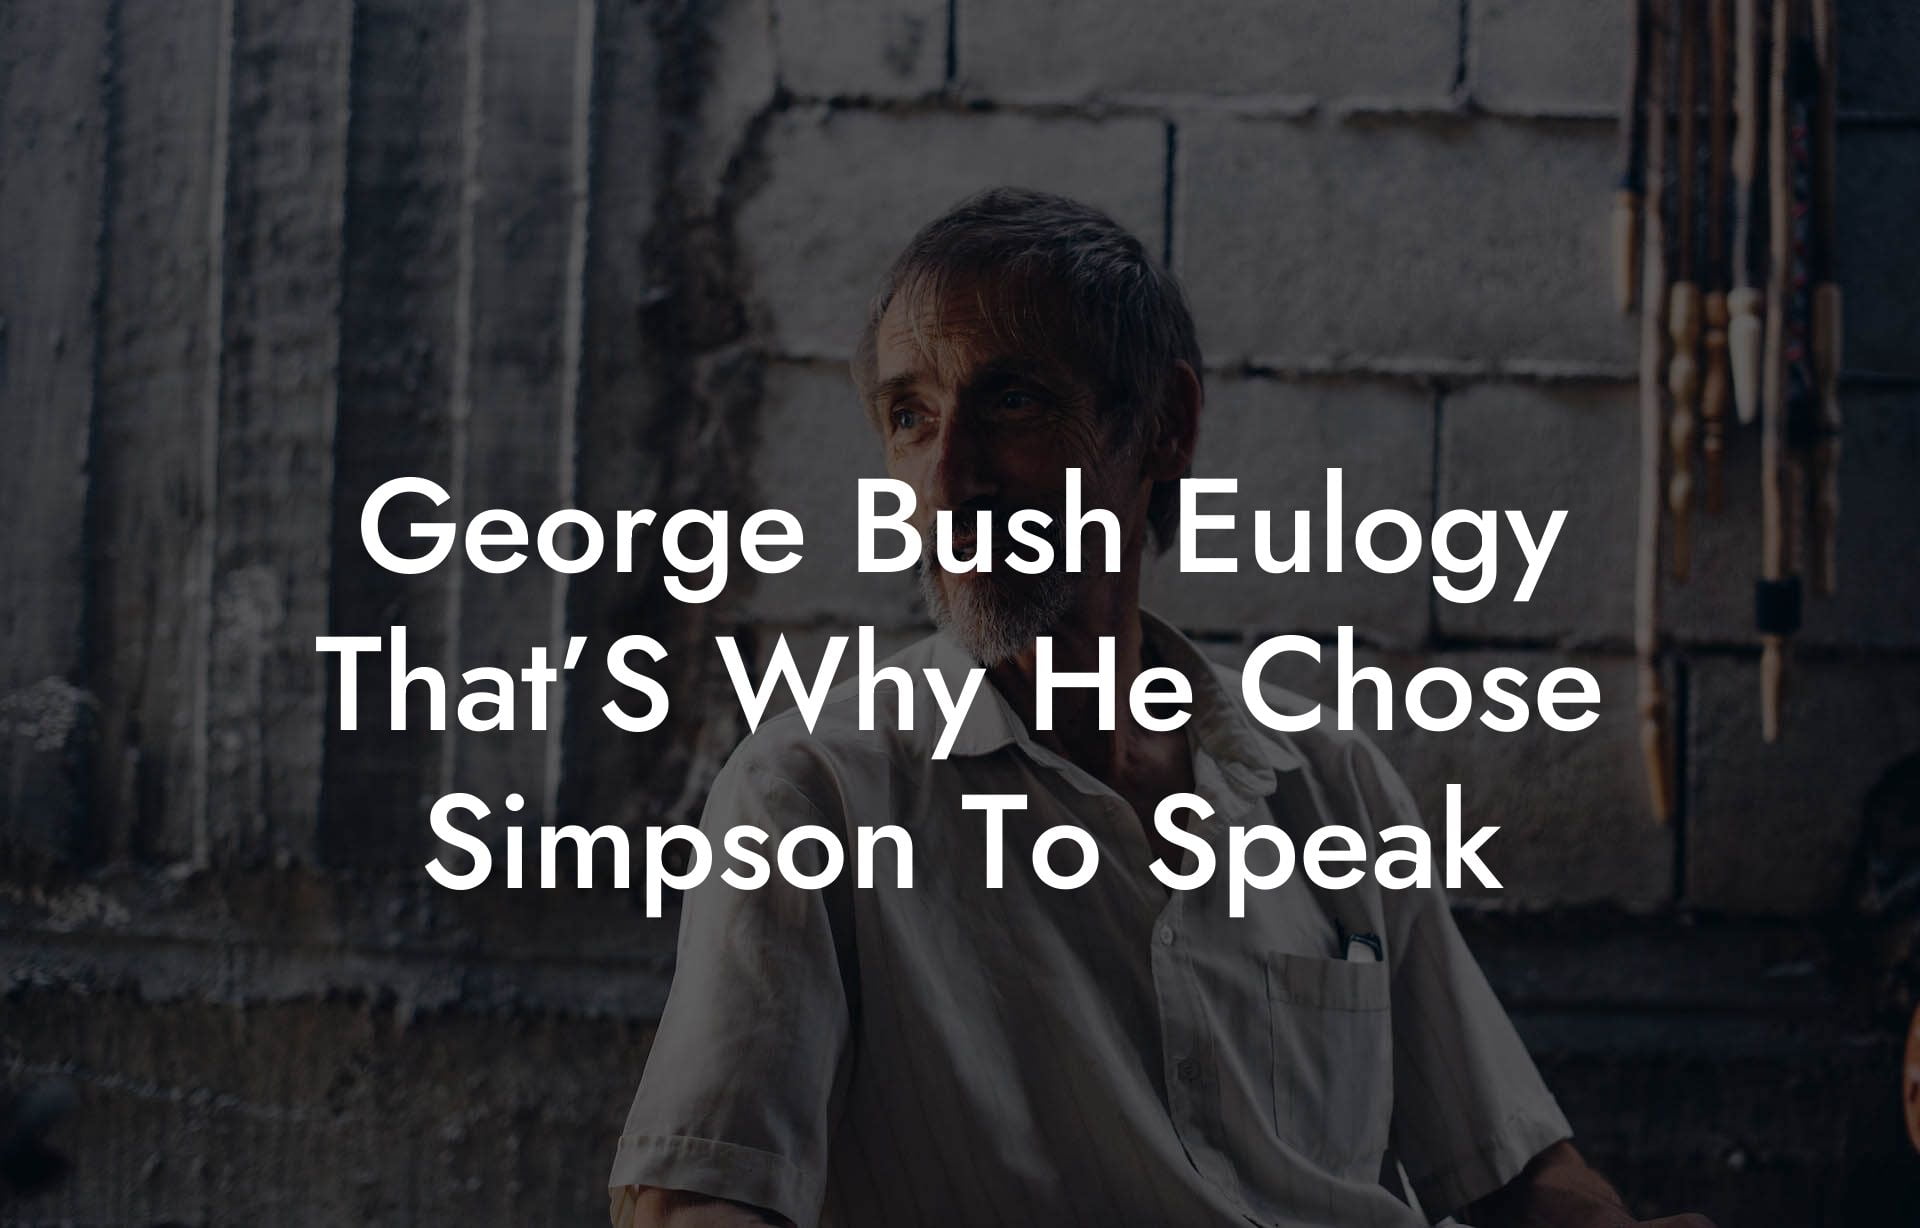 George Bush Eulogy That’S Why He Chose Simpson To Speak